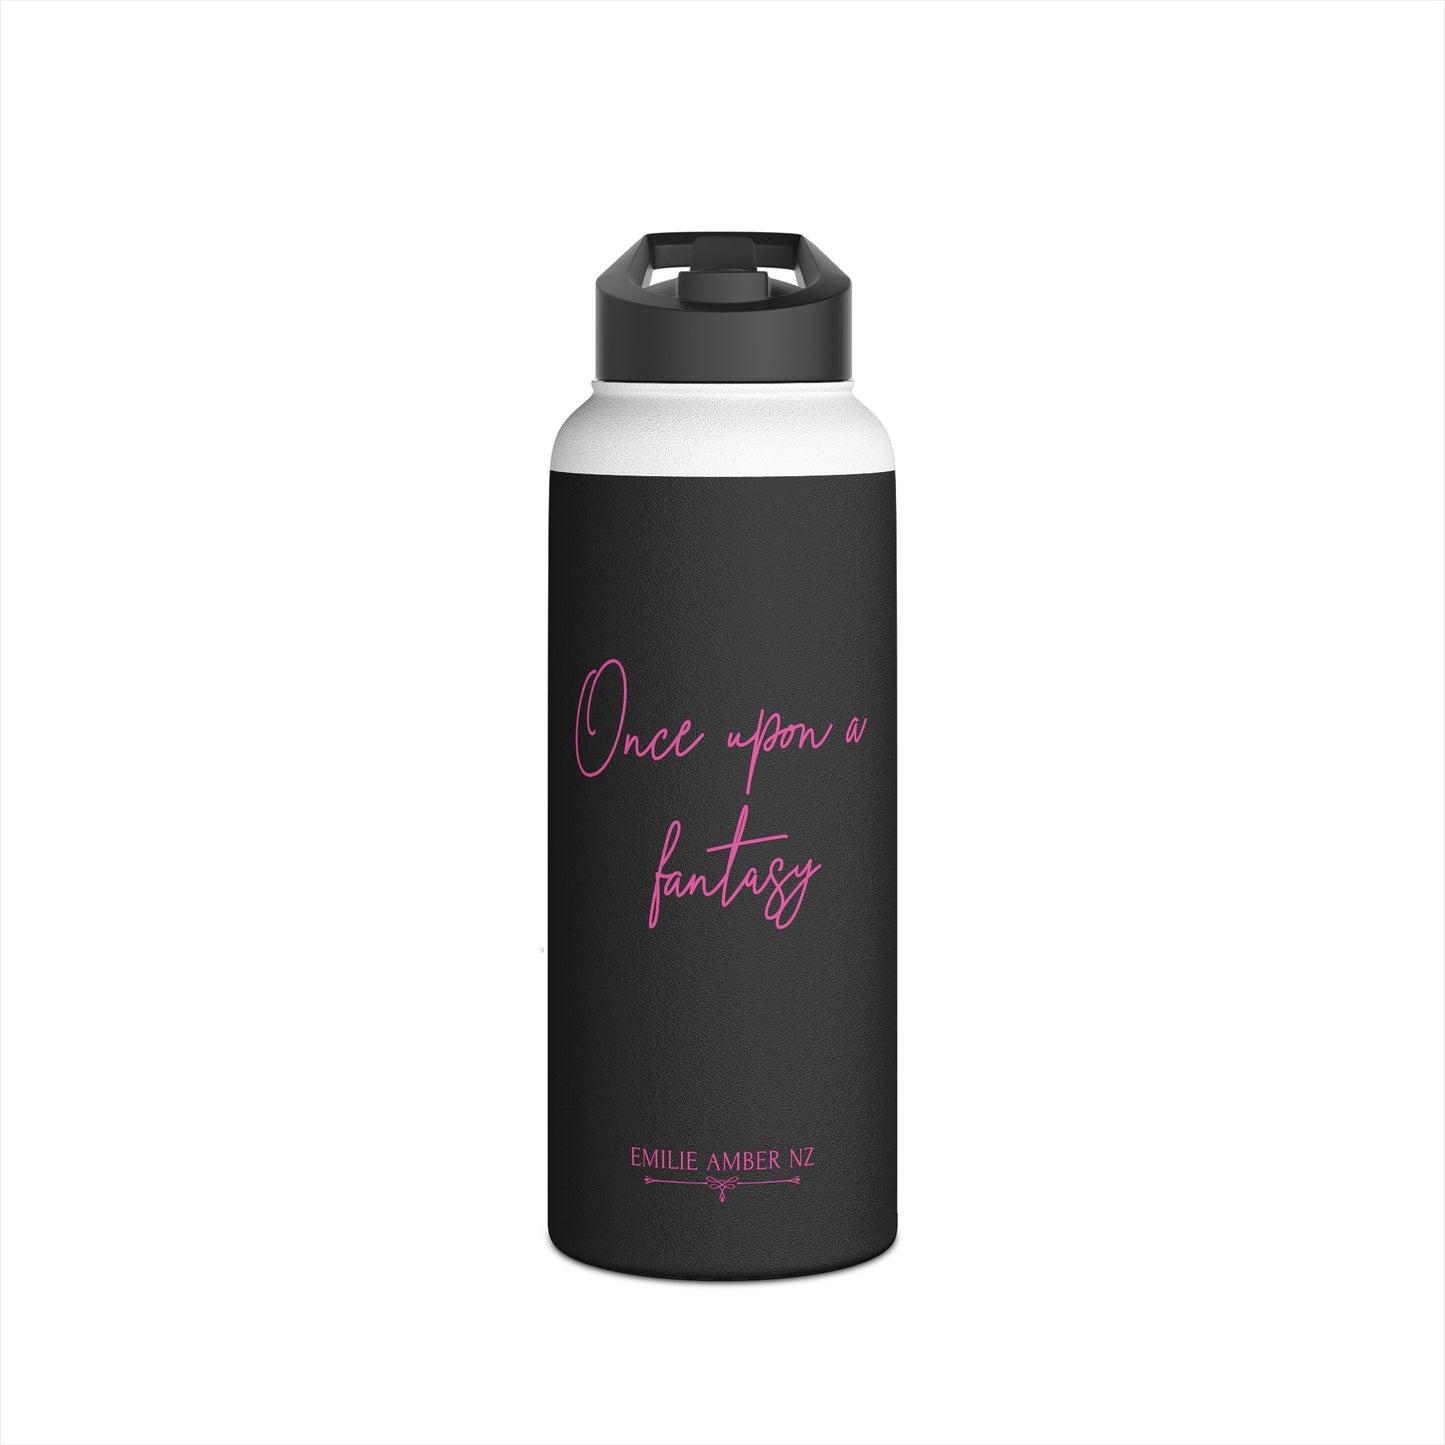 Once Upon A Fantasy Stainless Steel Water Bottle, Standard Lid